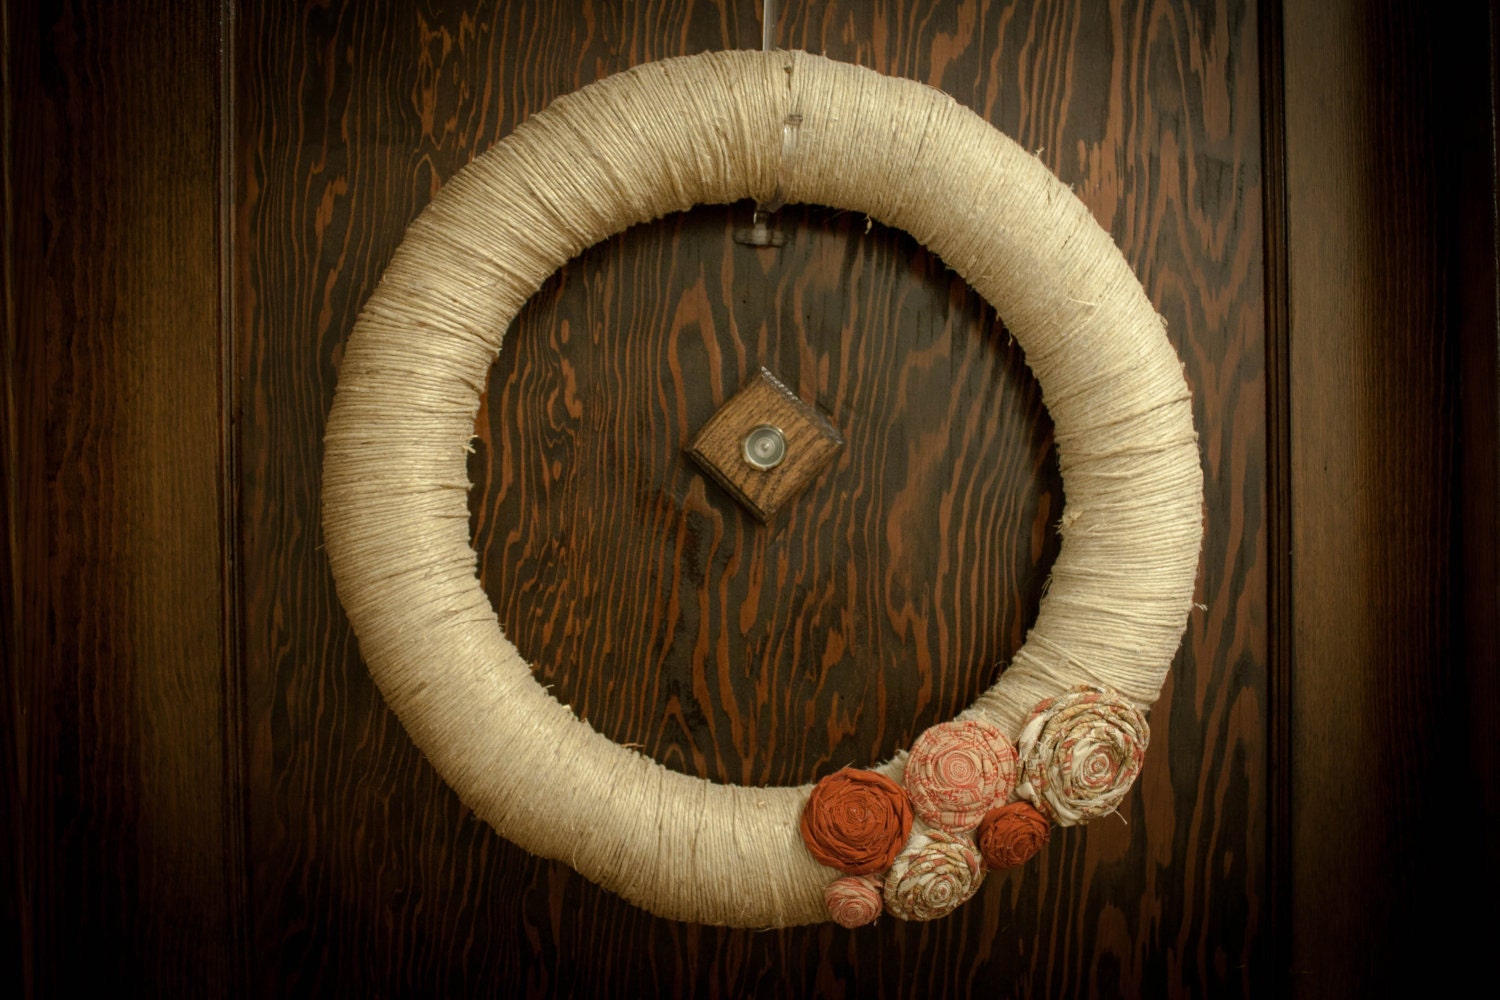 Twine wreath with rustic rosette accents